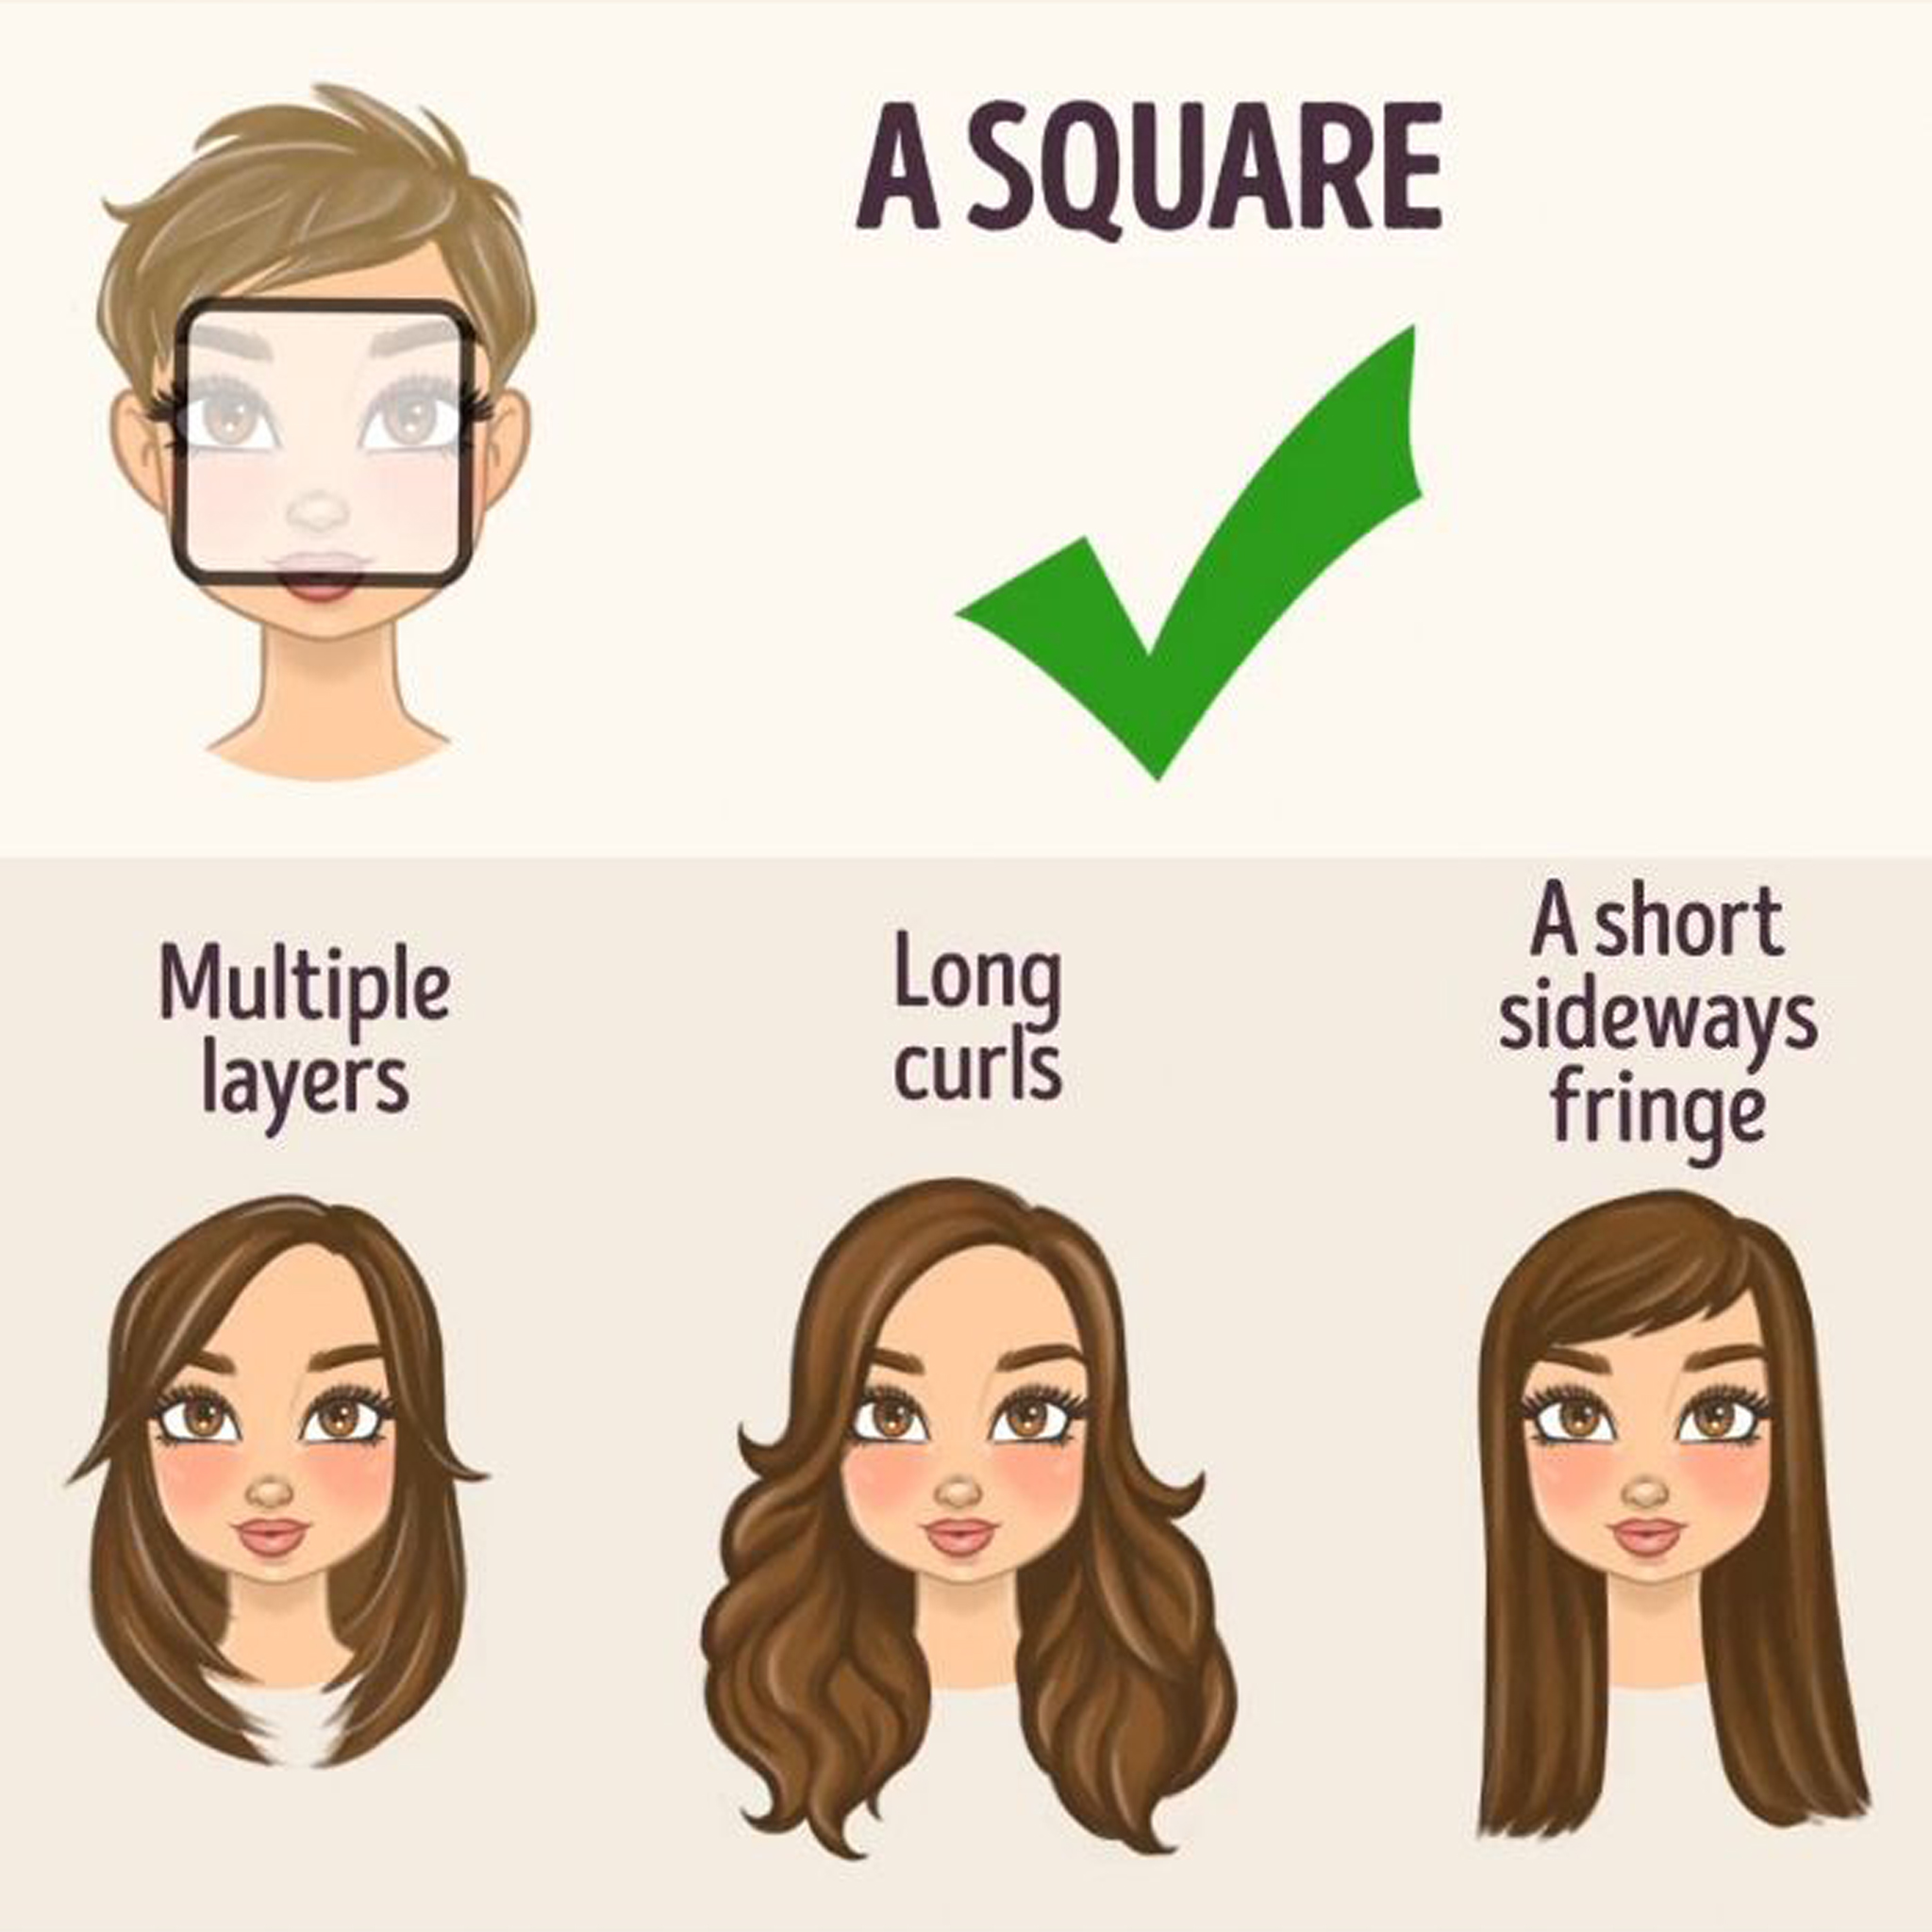 haircuts for different face shapes